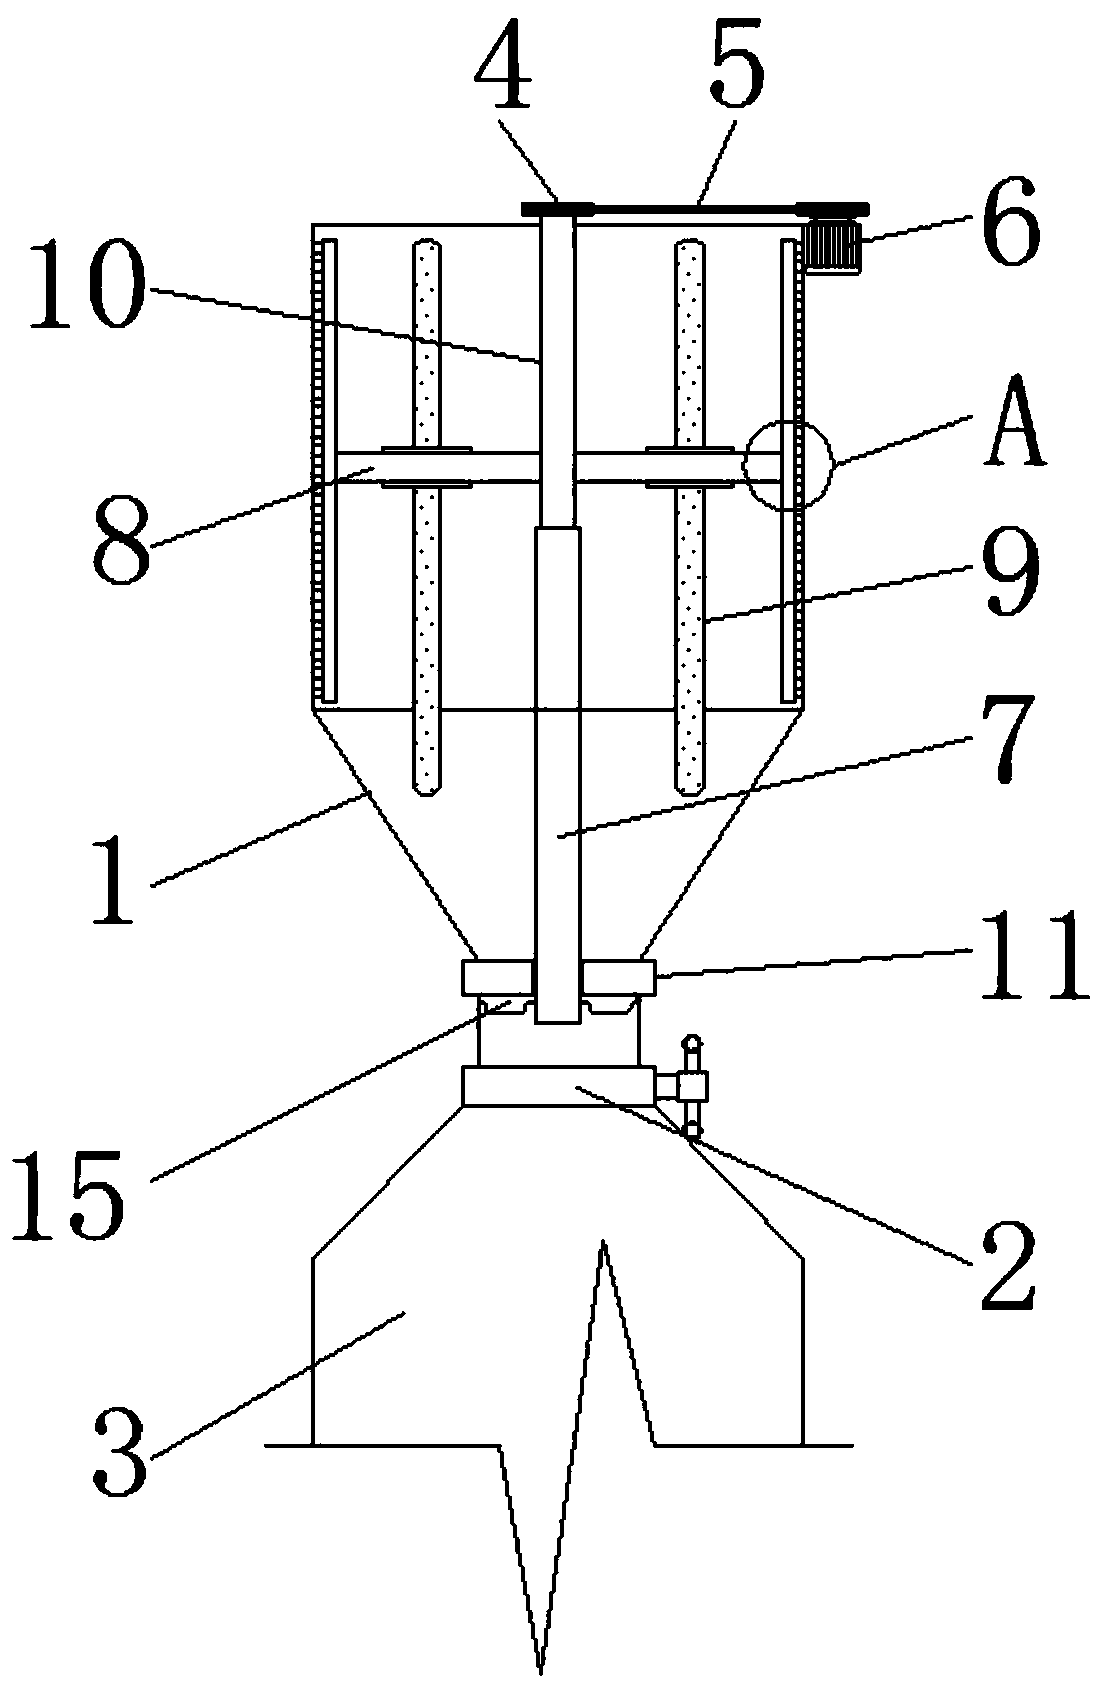 A powder silo device capable of equal amount of feeding